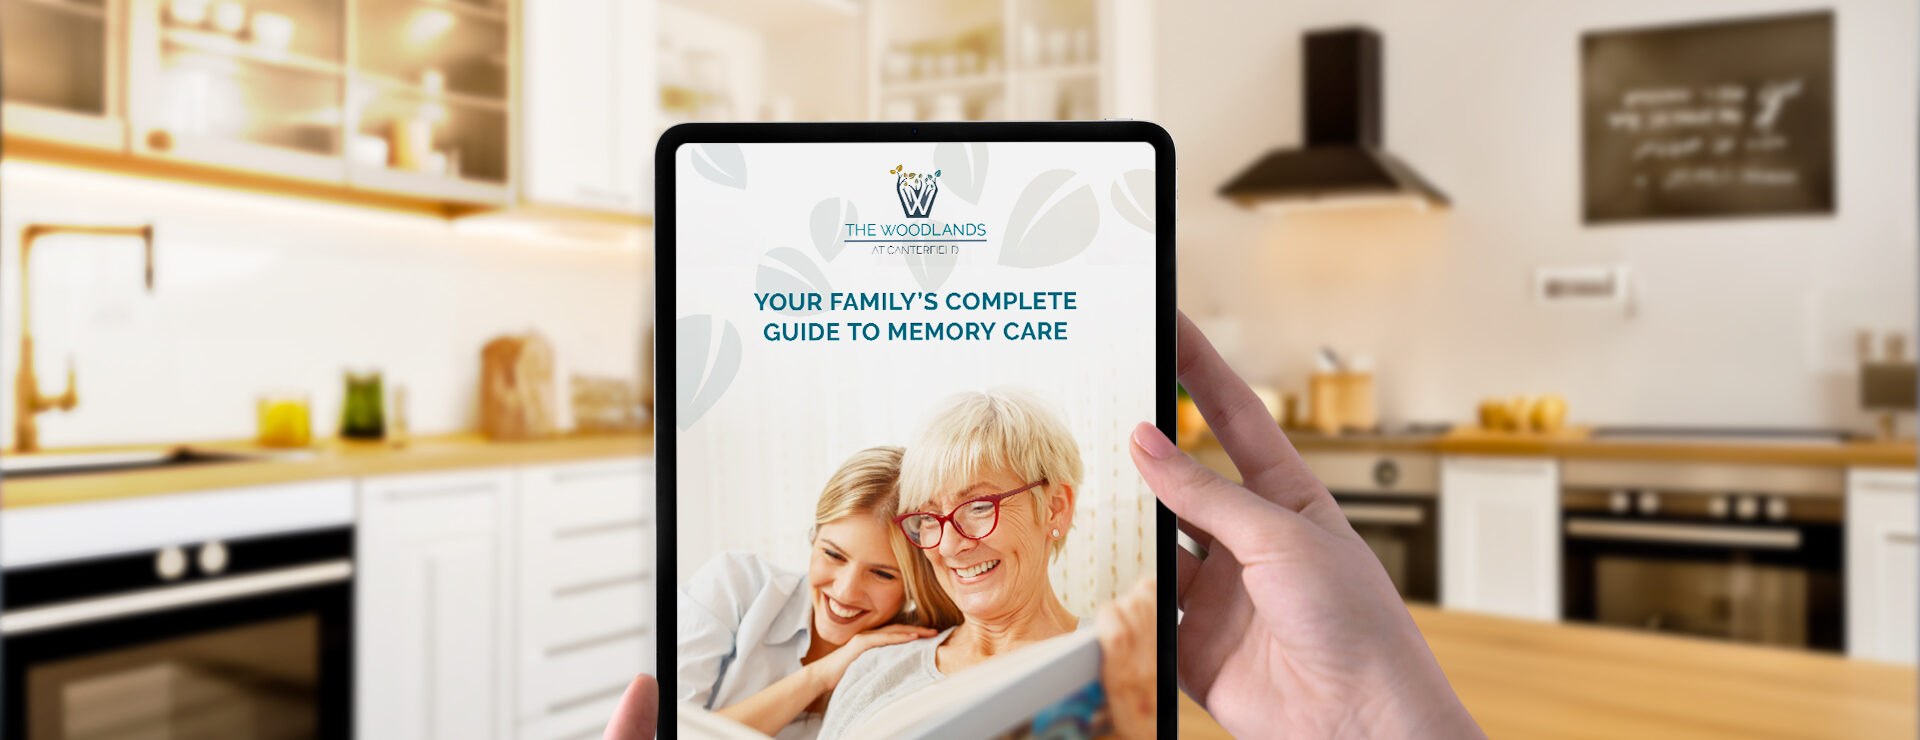 Your Family's Complete Guide to Memory Care